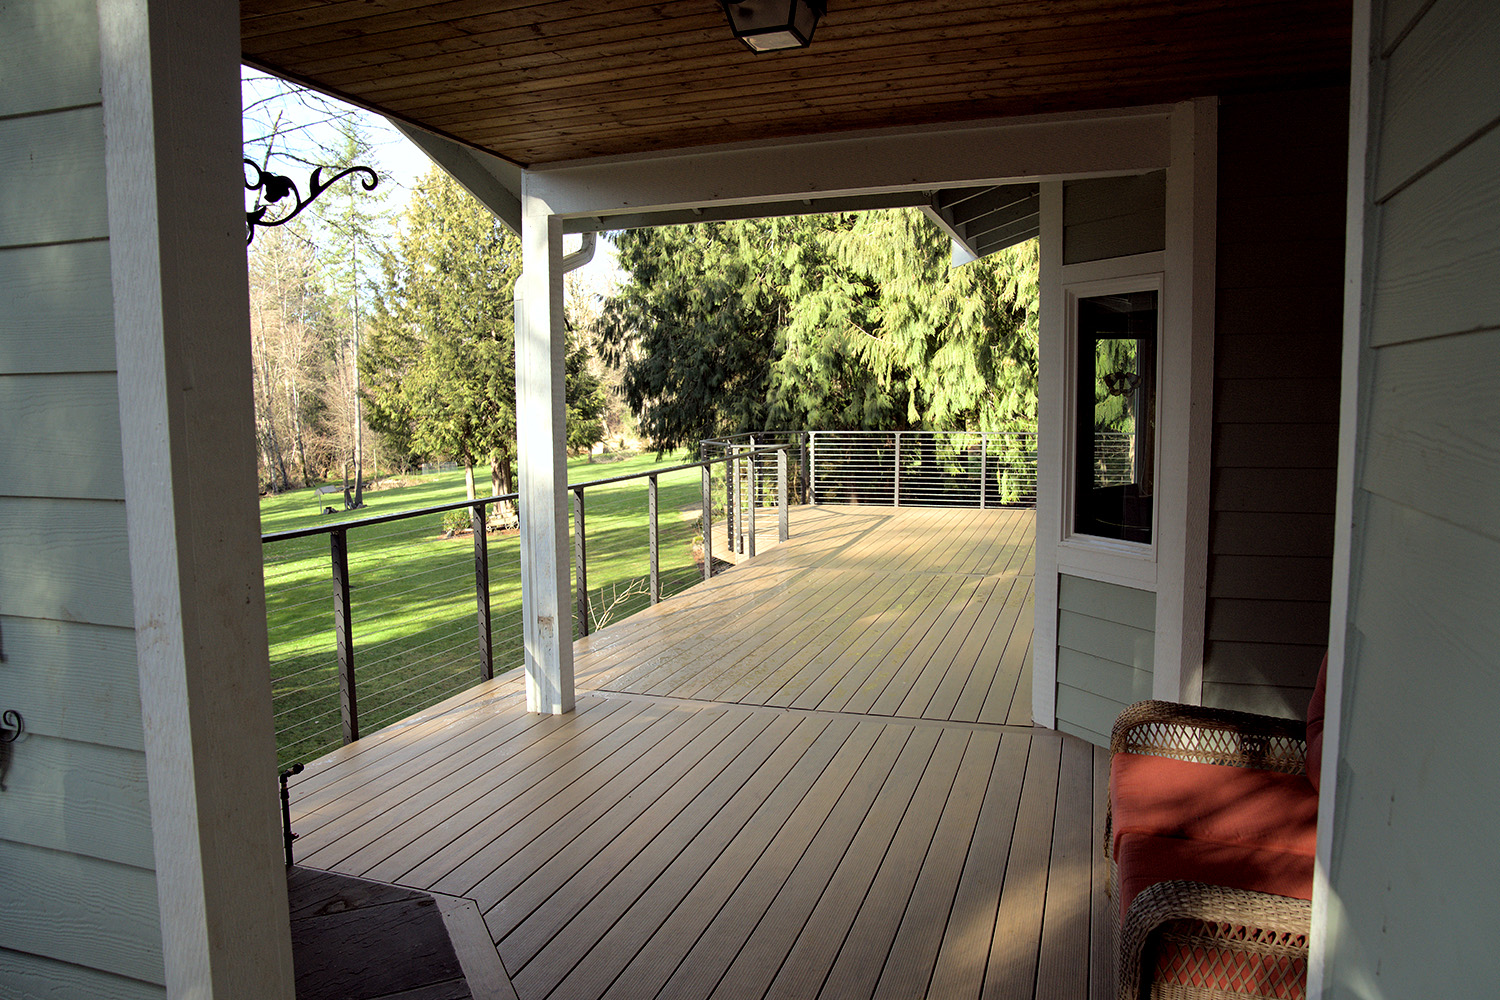 Covering a deck protects your investment from the elements and keeps the area cool and comfortable so you can enjoy your deck year-round